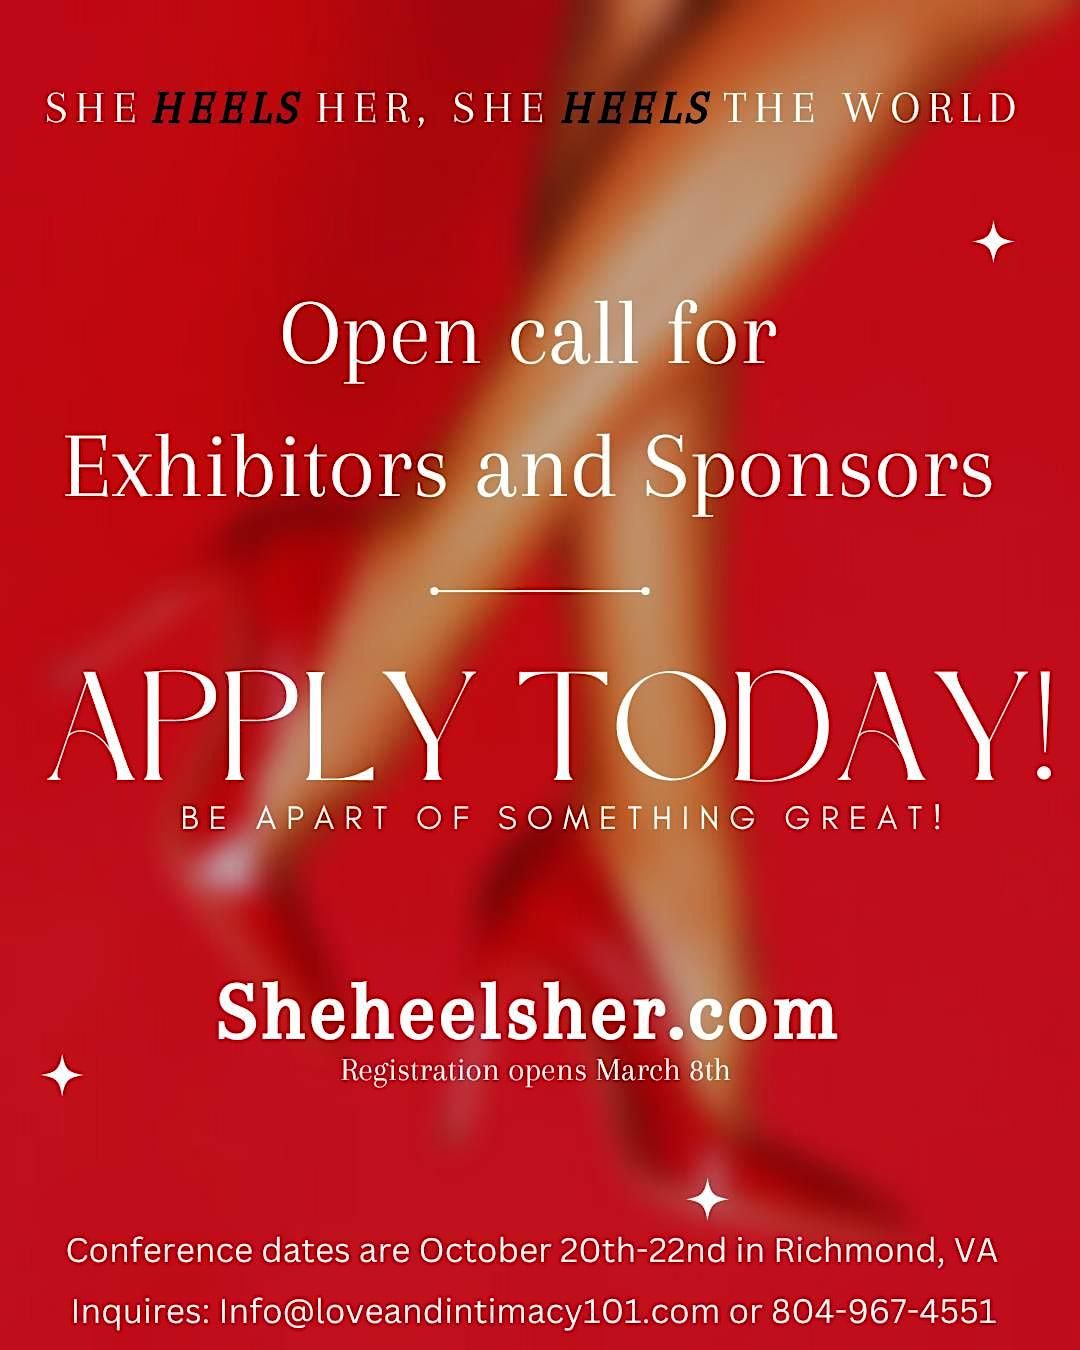 She Heels Her, She Heels the World! Sponsors & Exhibitors only